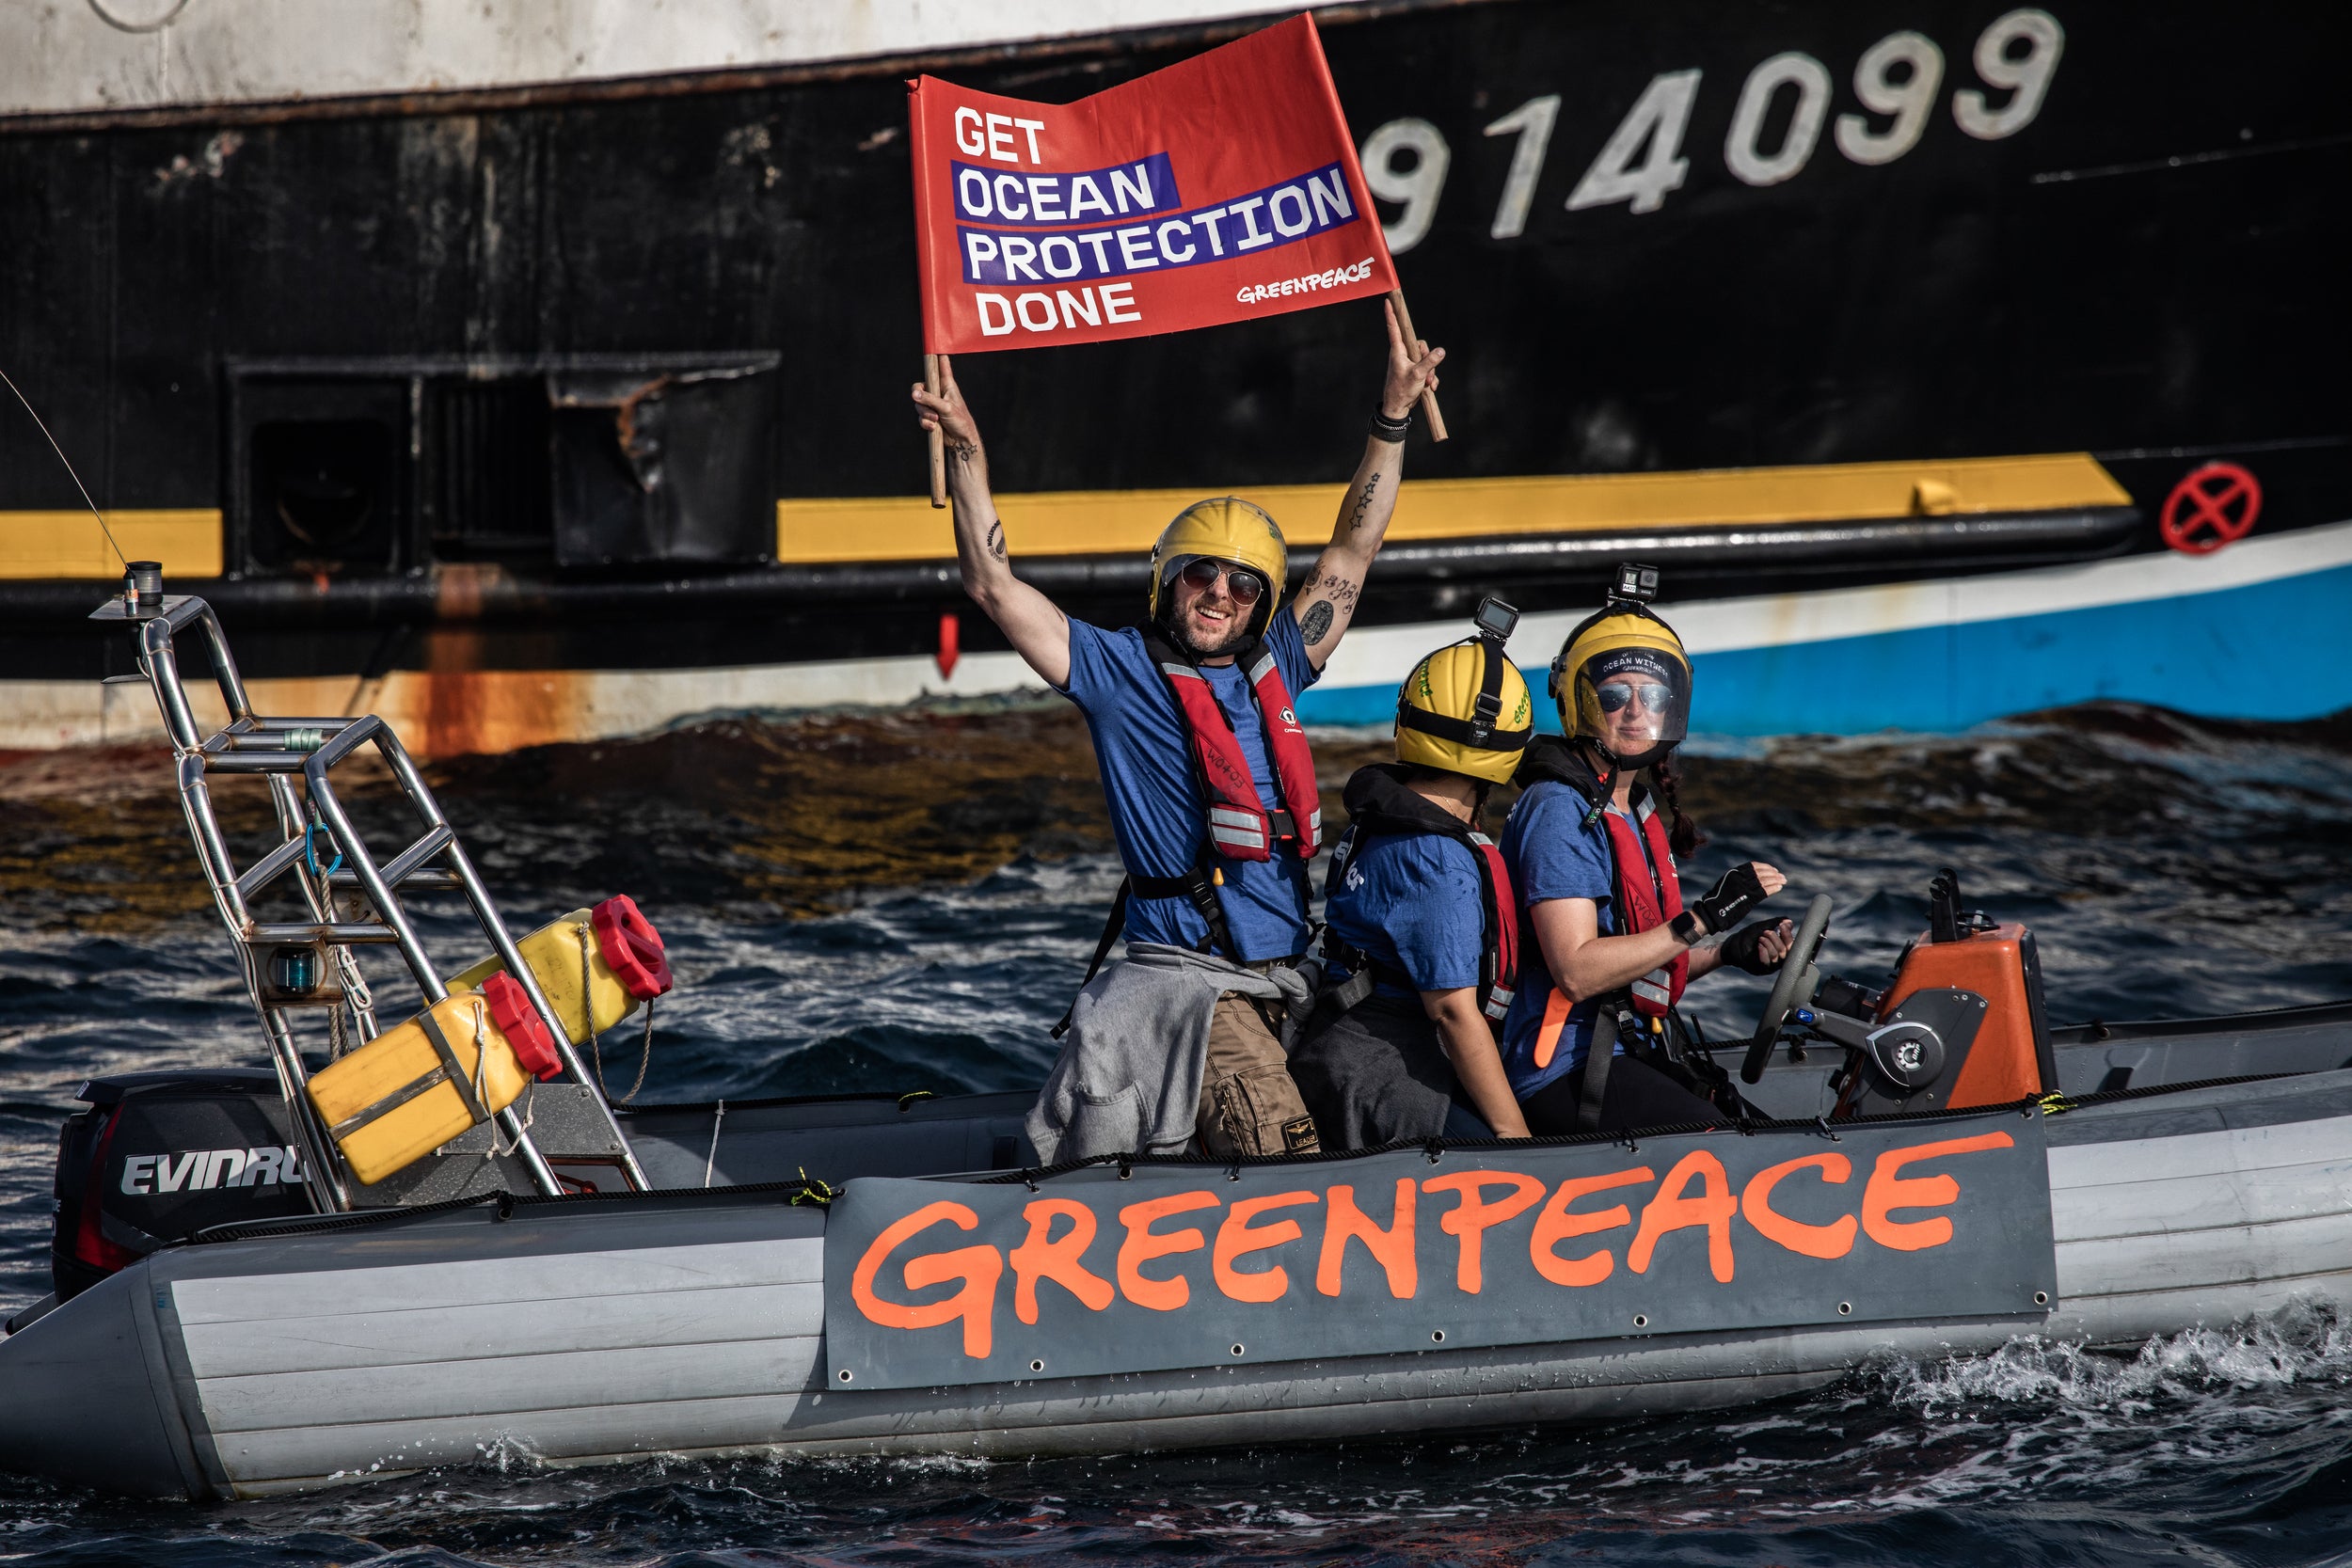 Simon Pegg joins Operation Ocean Witness for a banner action on a Greenpeace inflatable against French fly shooter vessel Saint Josse IV, in the English Channel